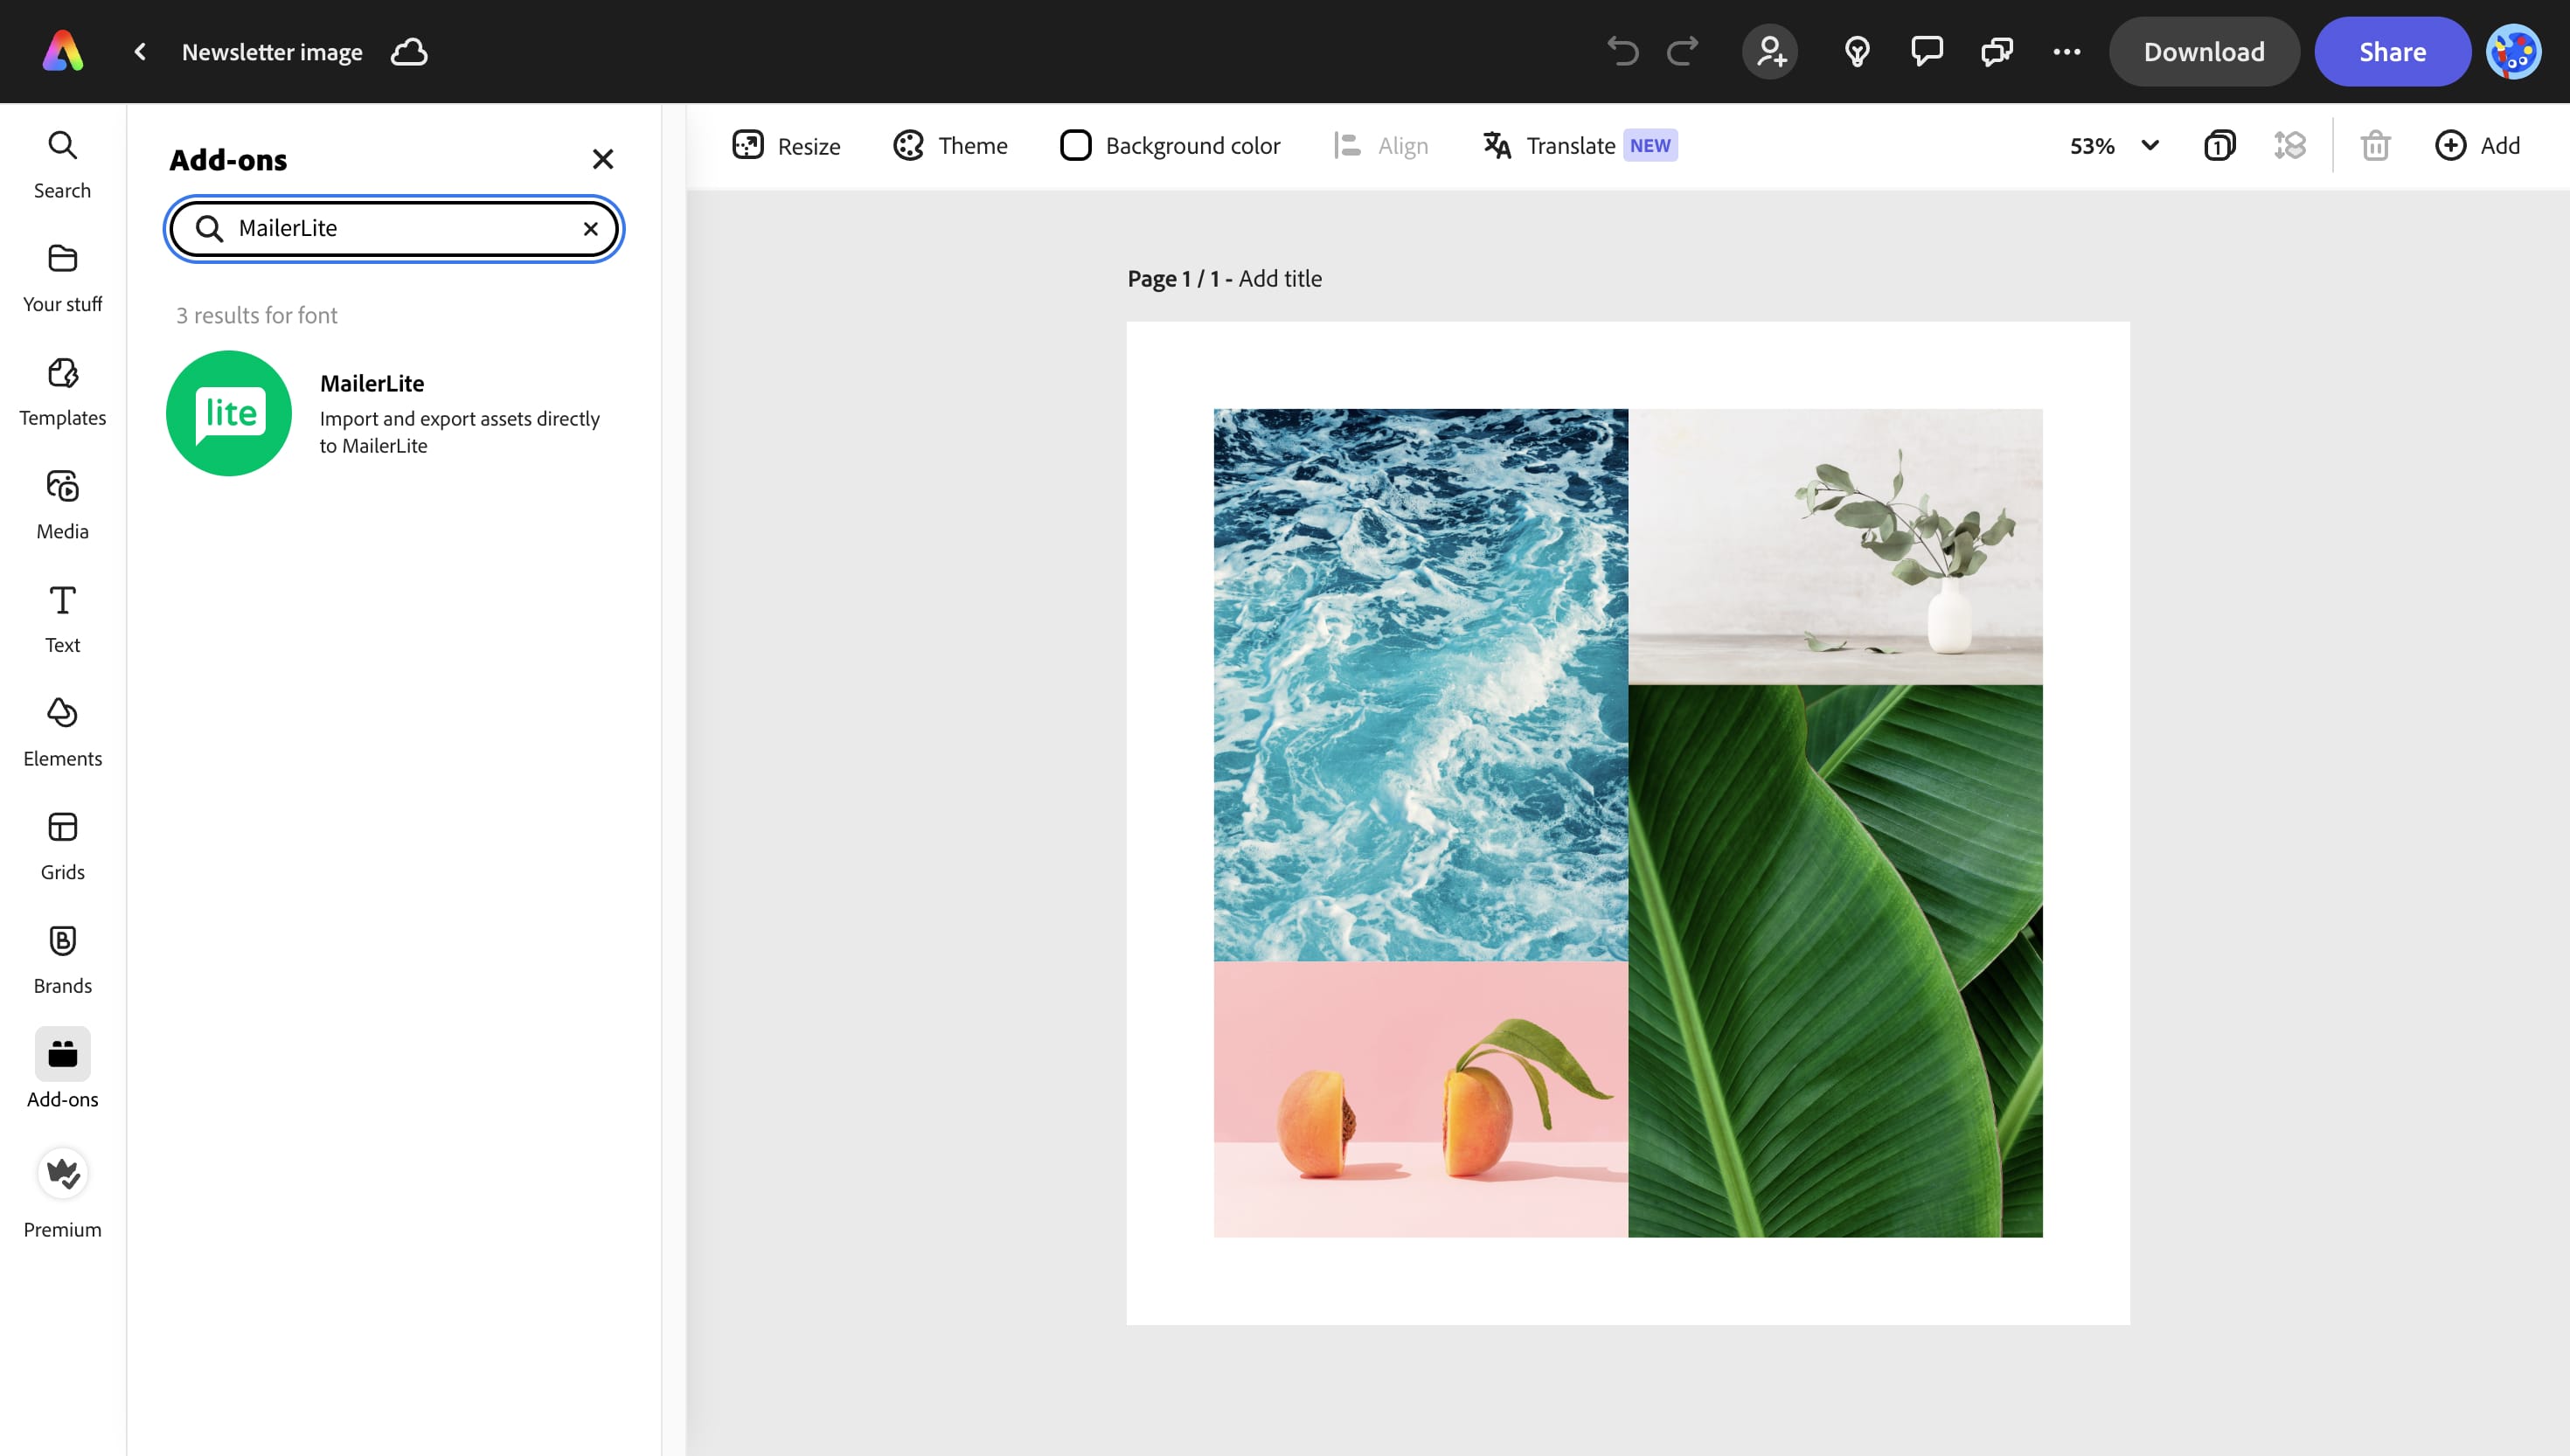 A screenshot from Adobe Express with 